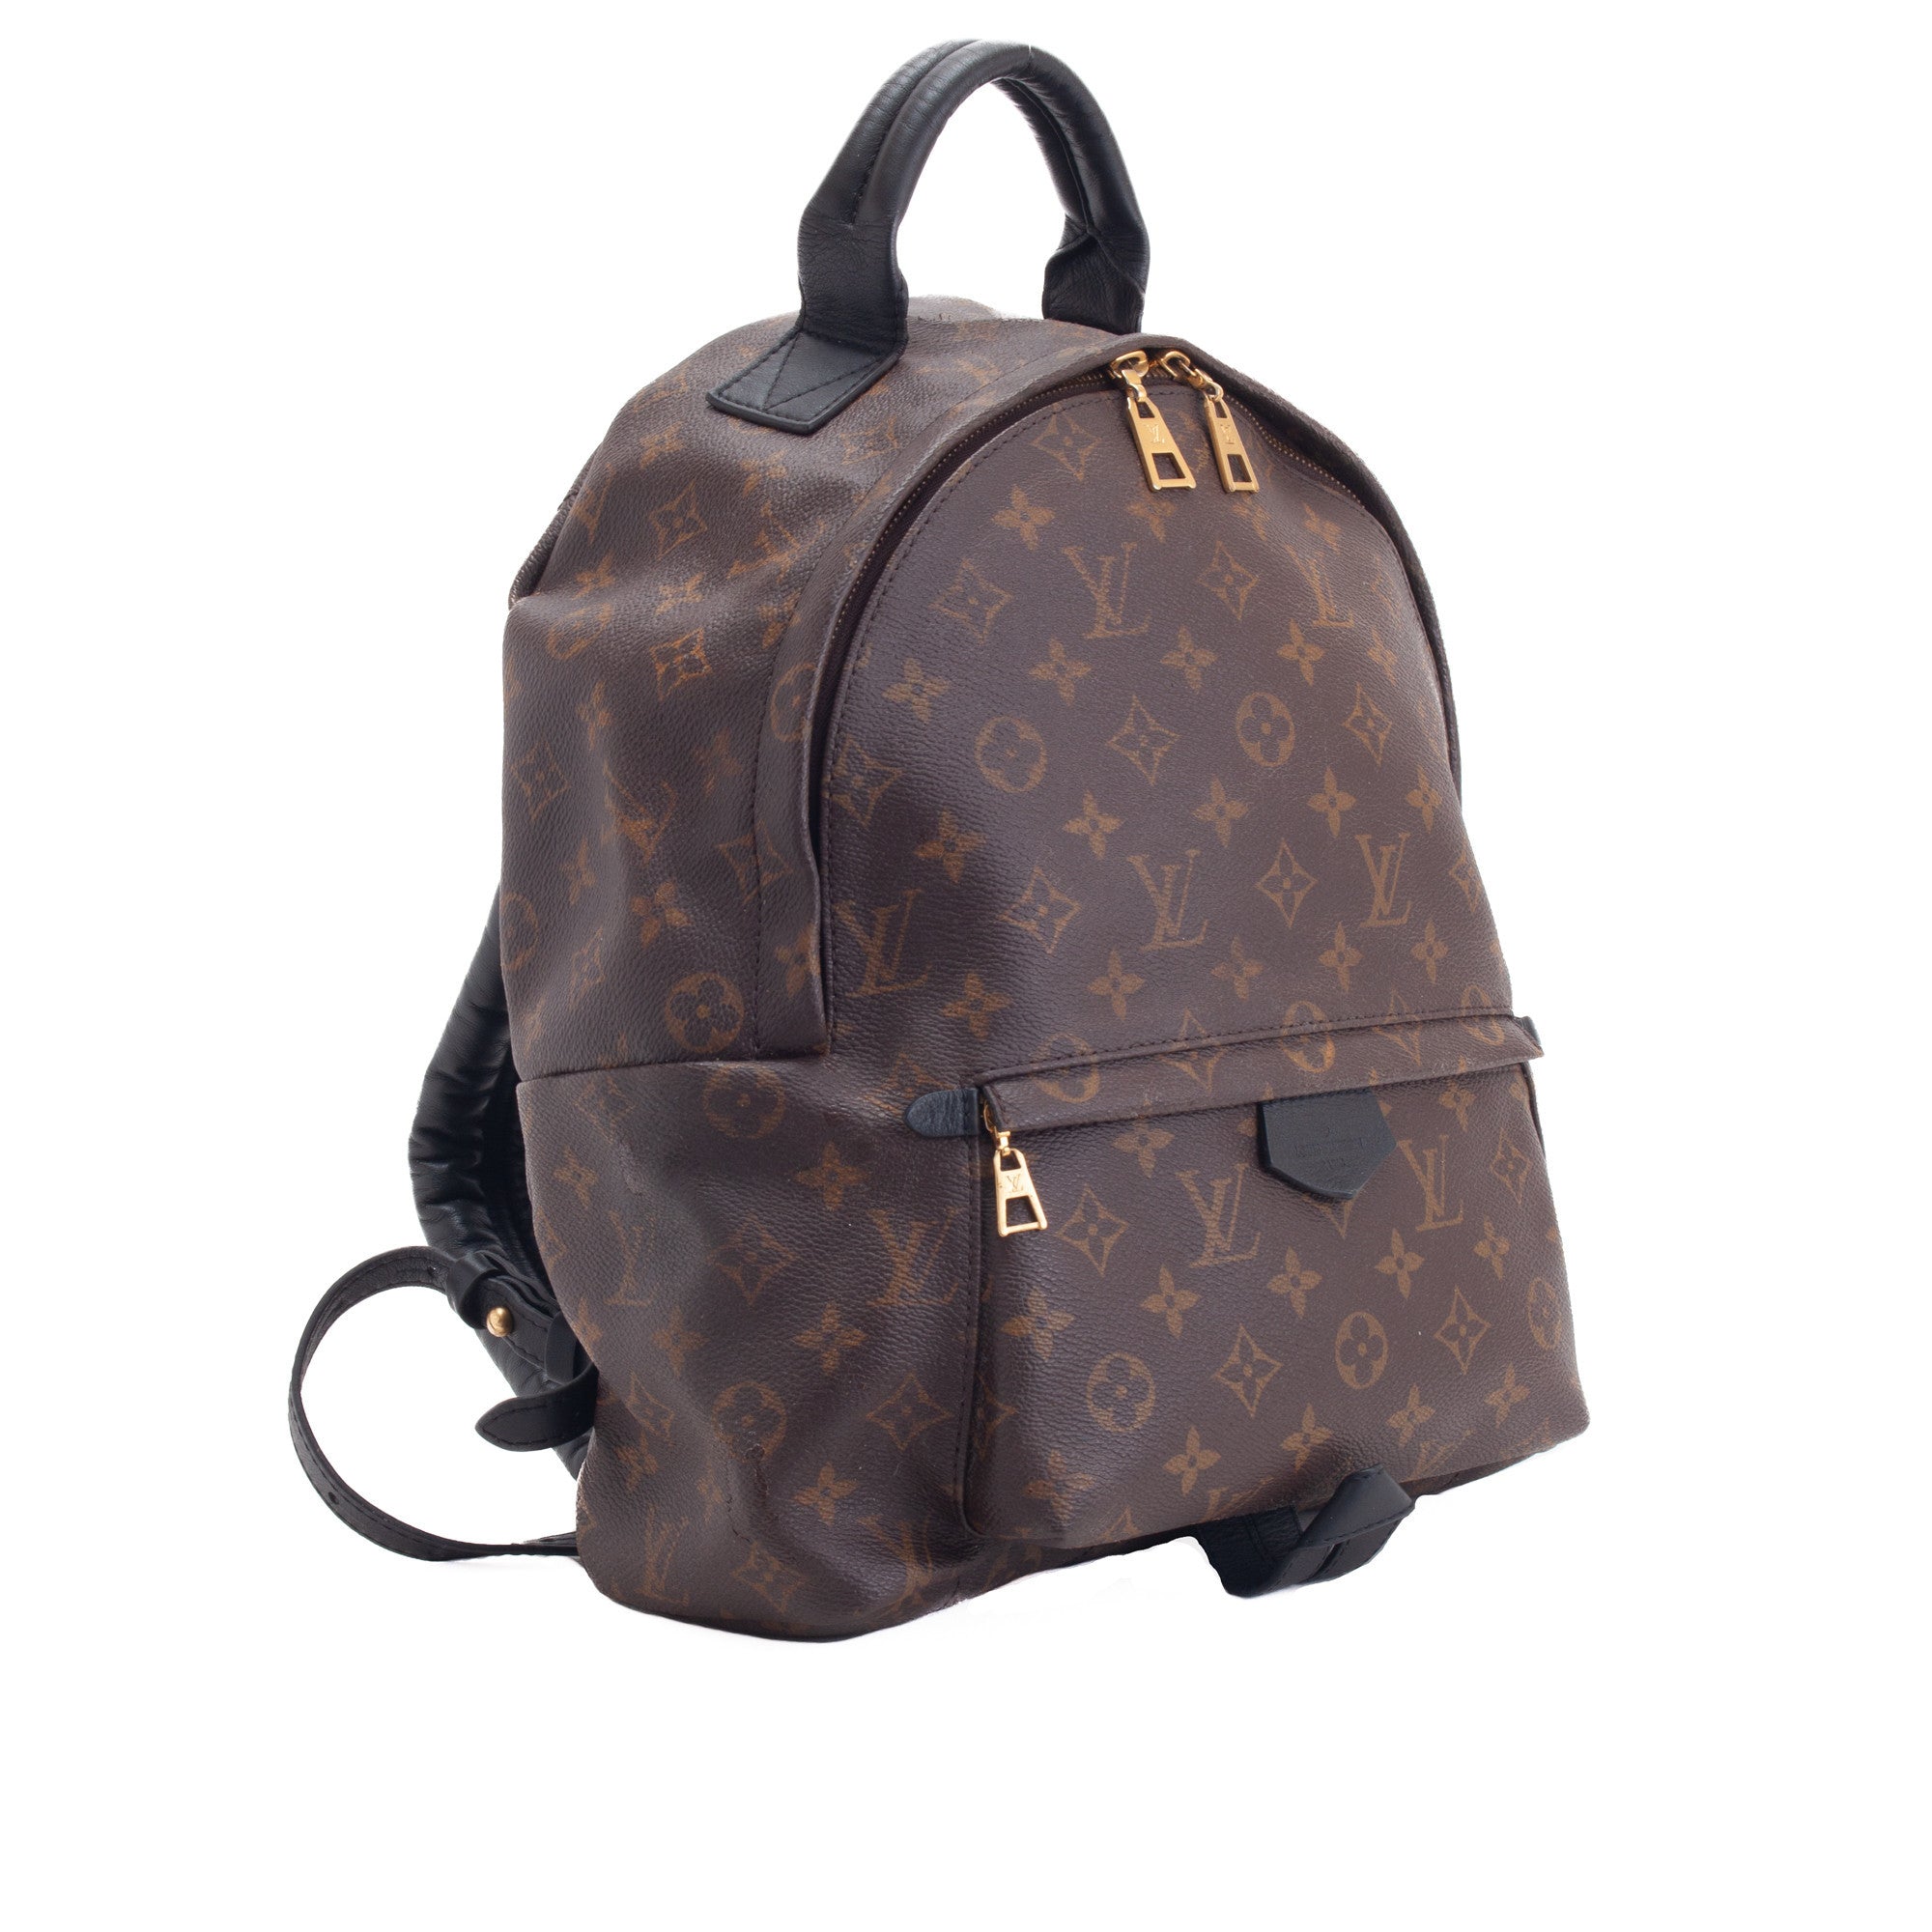 Sold at Auction: AUTHENTIC LOUIS VUITTON MONTSOURIS MM MONOGRAM CANVAS,  LEATHER BACKPACK STYLE